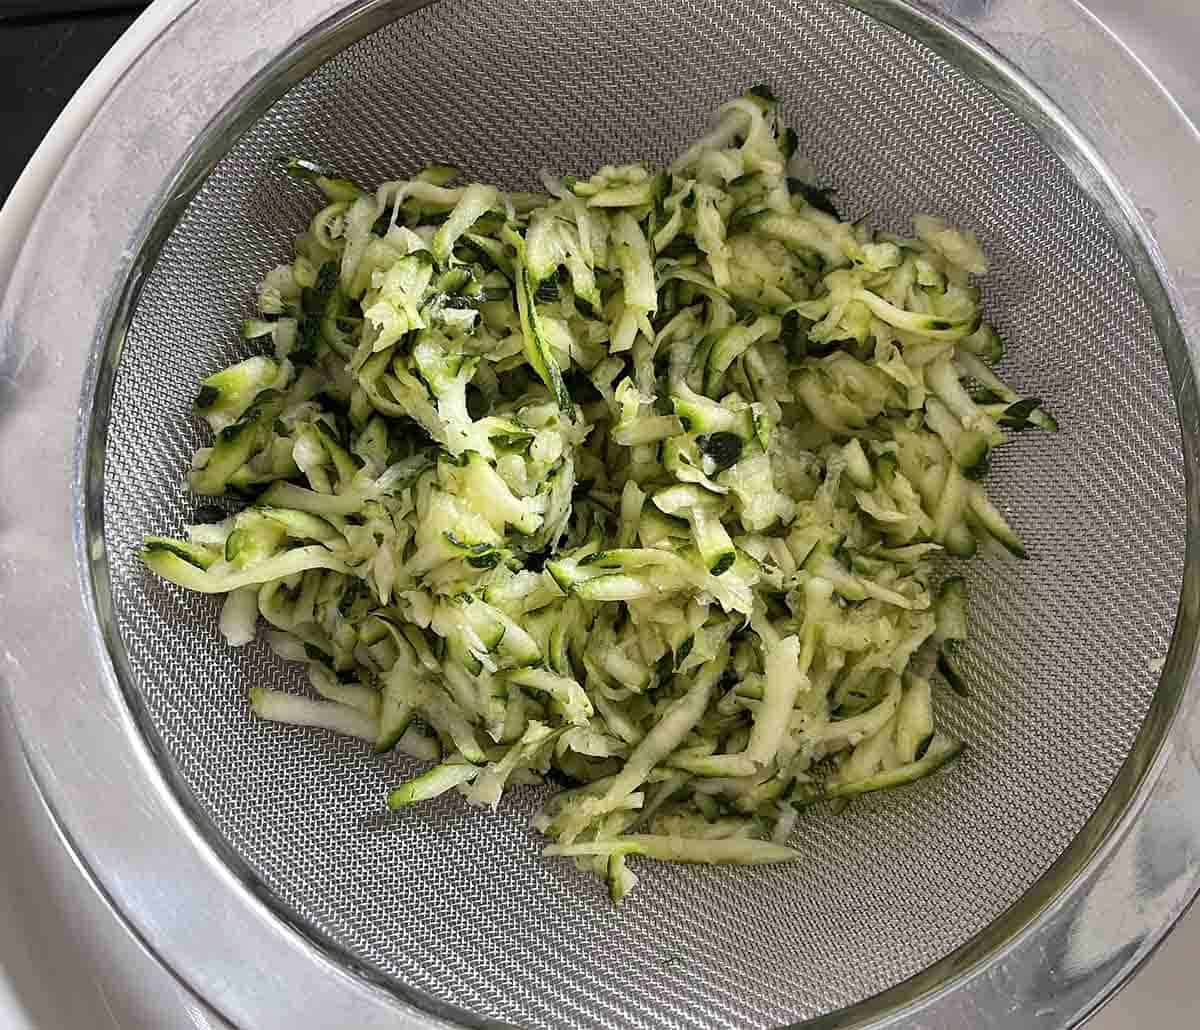 grated courgette in a bowl.